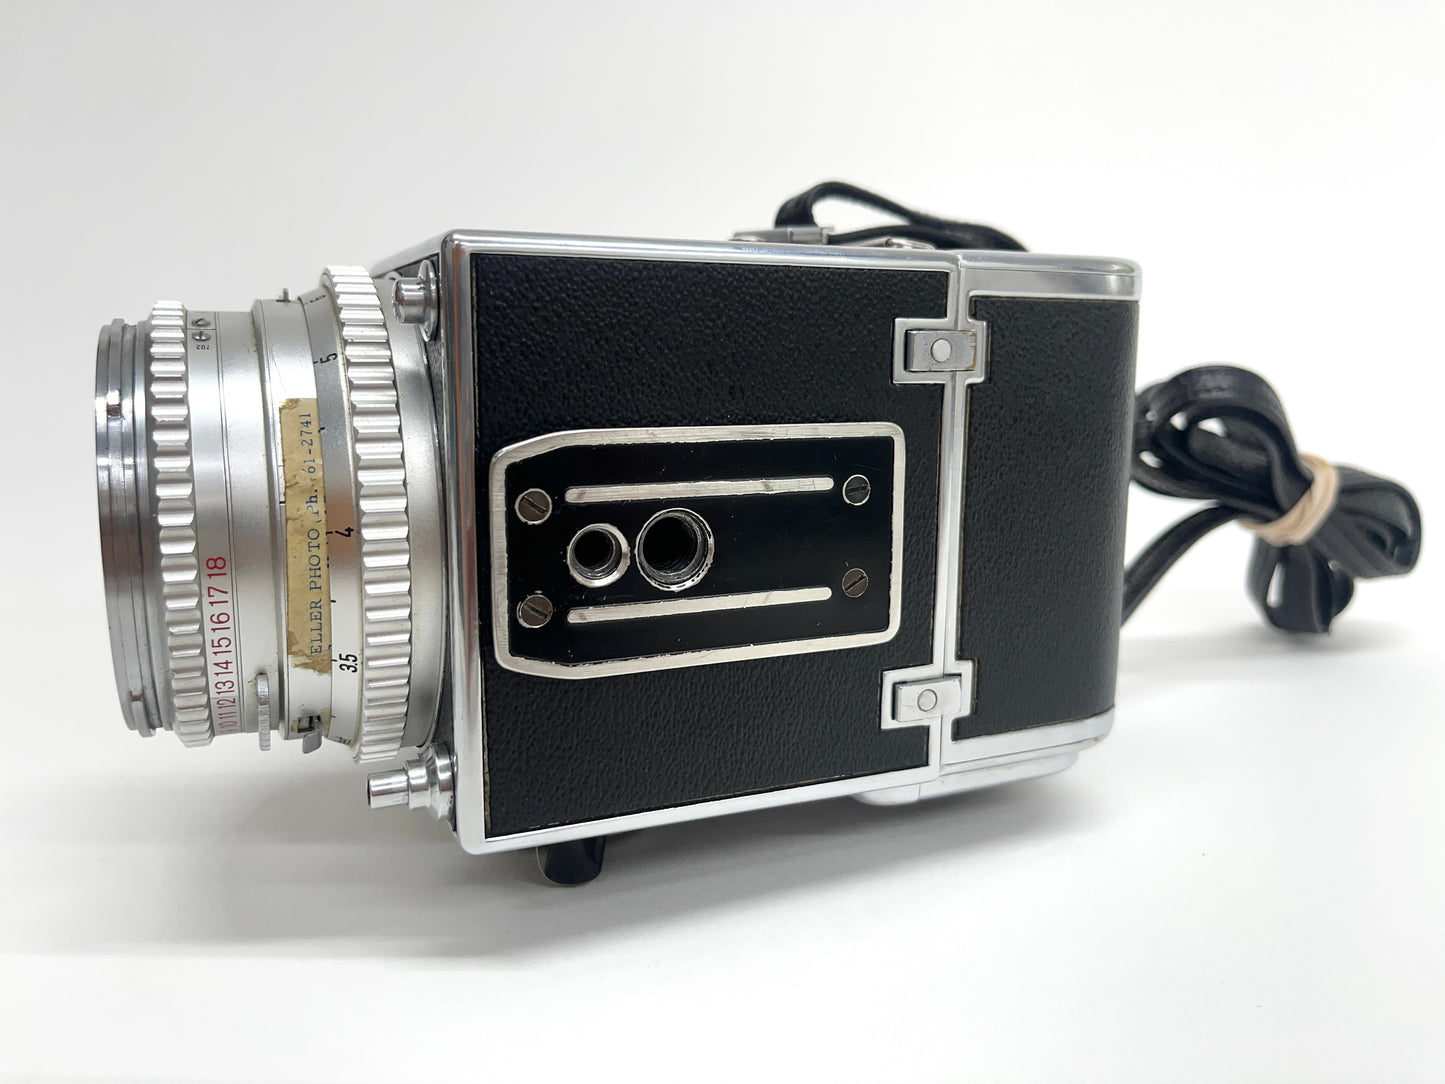 Hasselblad 500c Medium Format Body with 80mm f/2.8 Lens and Prism